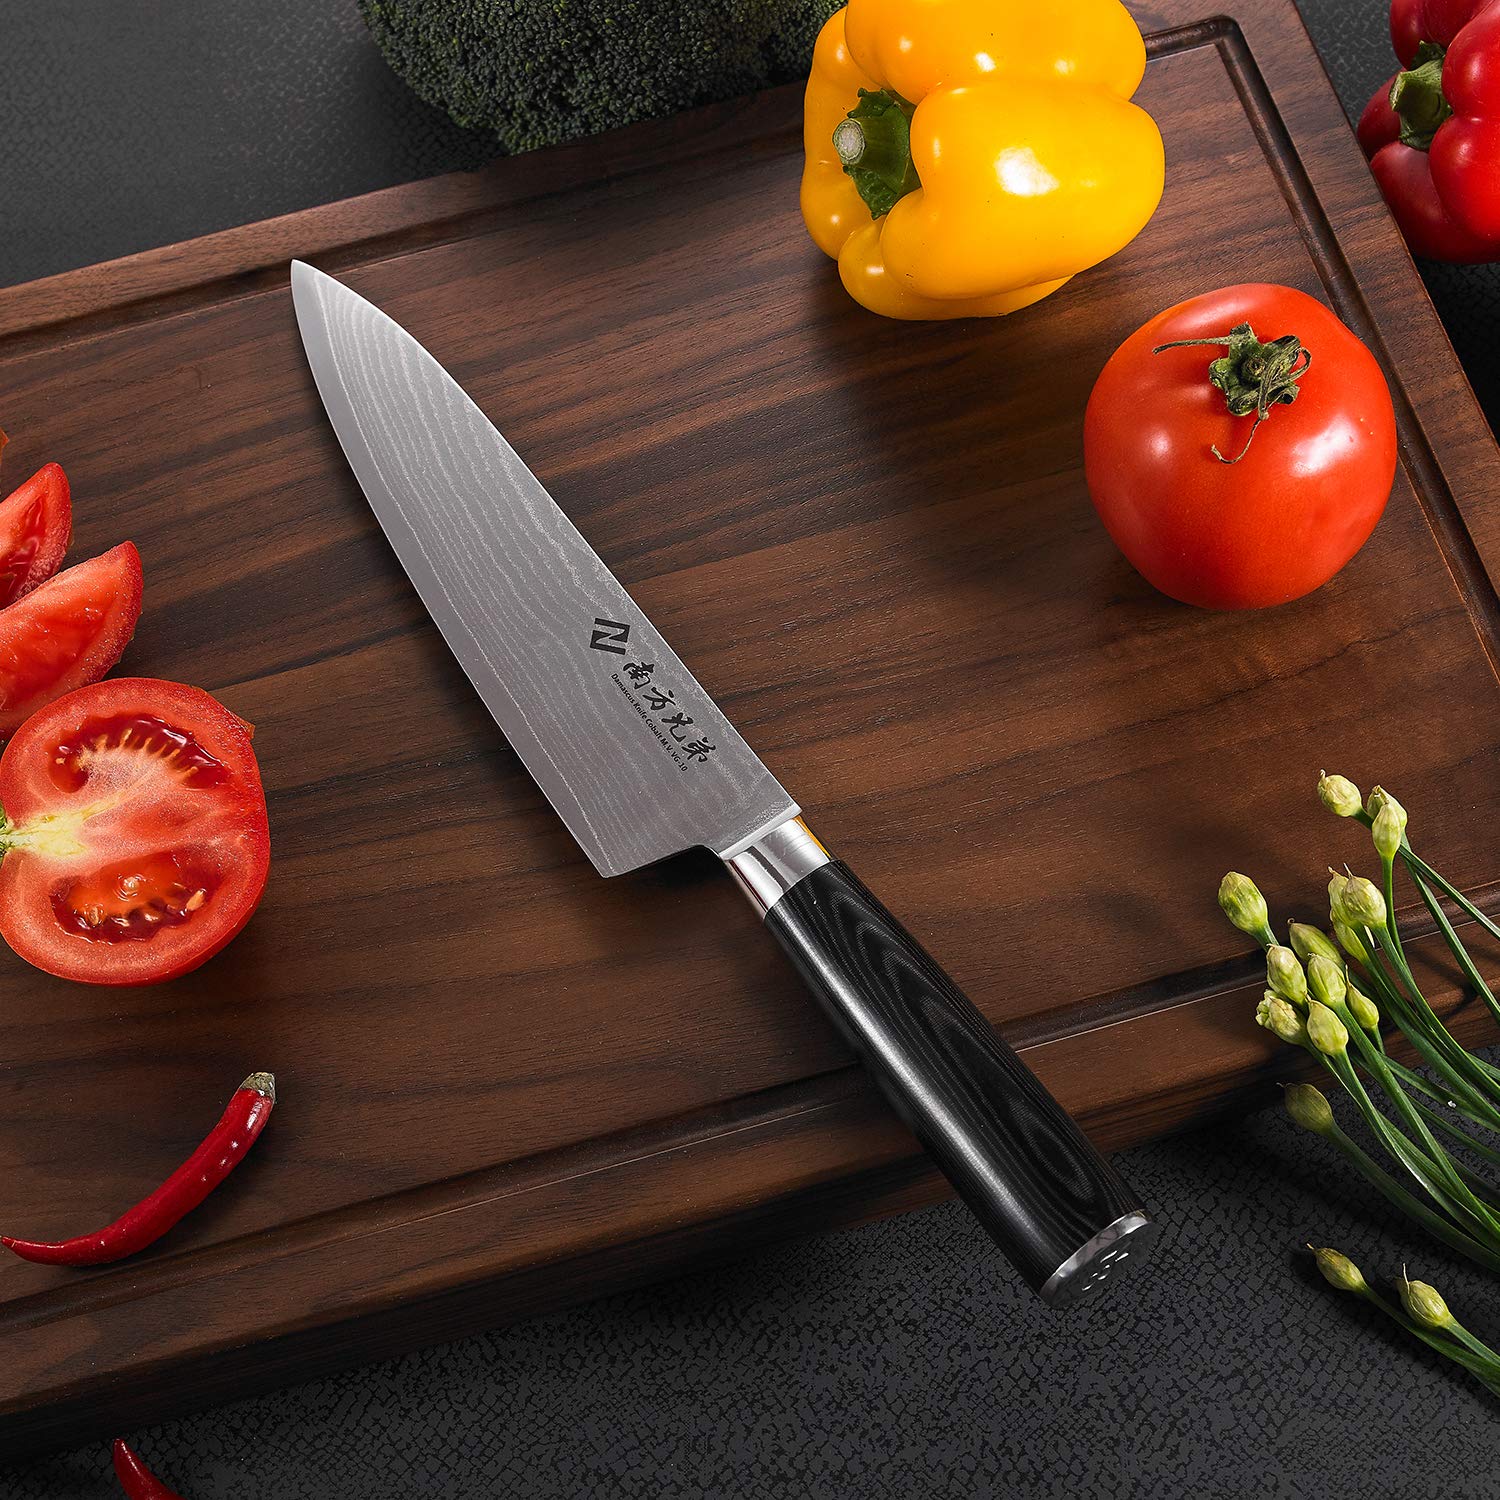 Damascus Cleaver Knife 7", 67-layers damascus steel VG10 Steel Core, Chinese Chef Knives Knife Meat Vegetable Cleaver with Ergonomic Wooden Handle and Gift Box